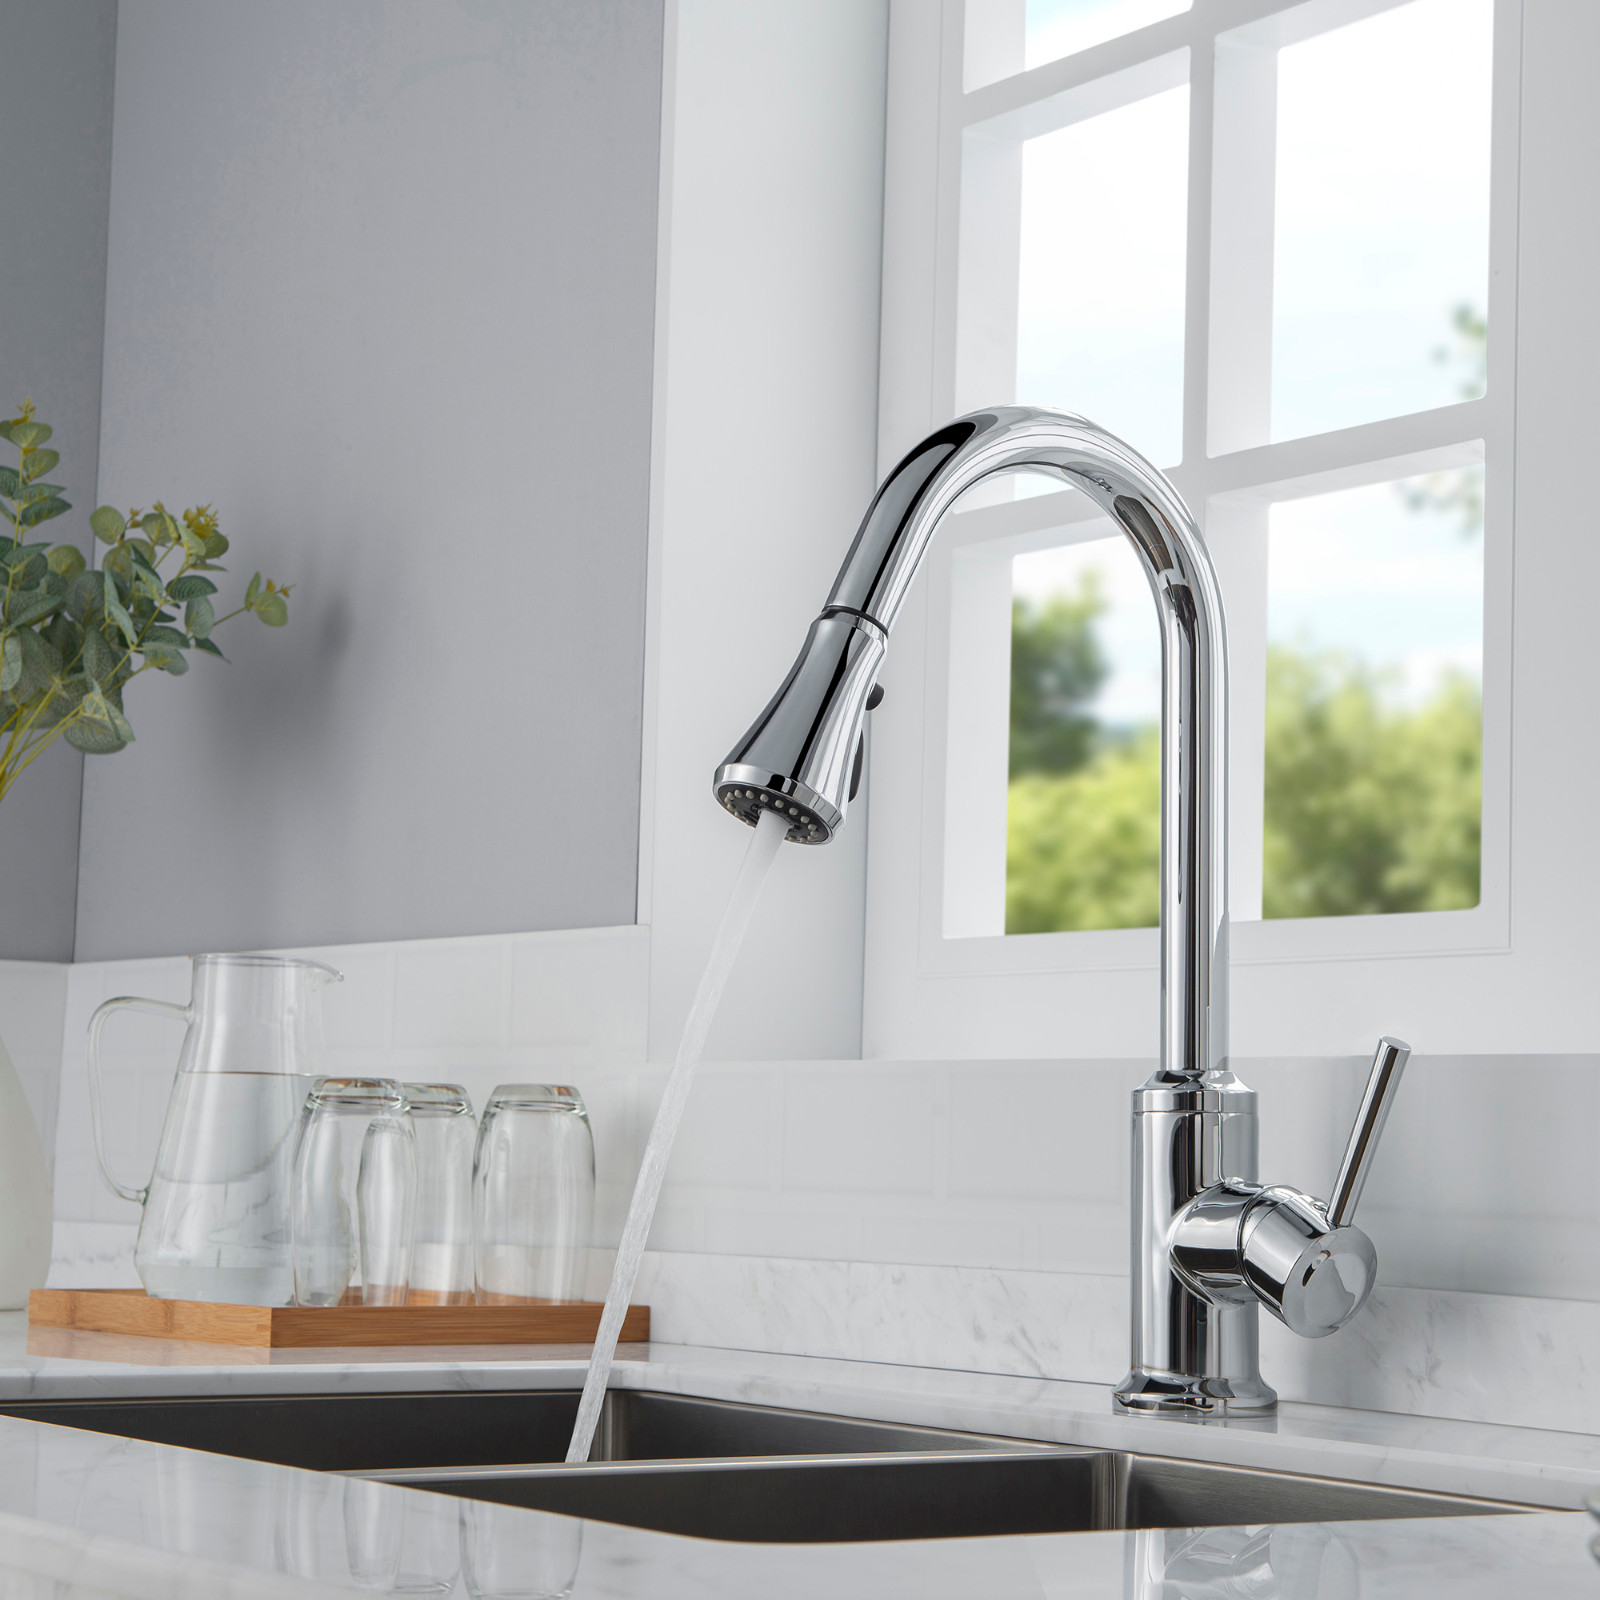  WOODBRIDGE WK101201CH Stainless Steel Single Handle Pull Down Kitchen Faucet in Chrome Finish._9022